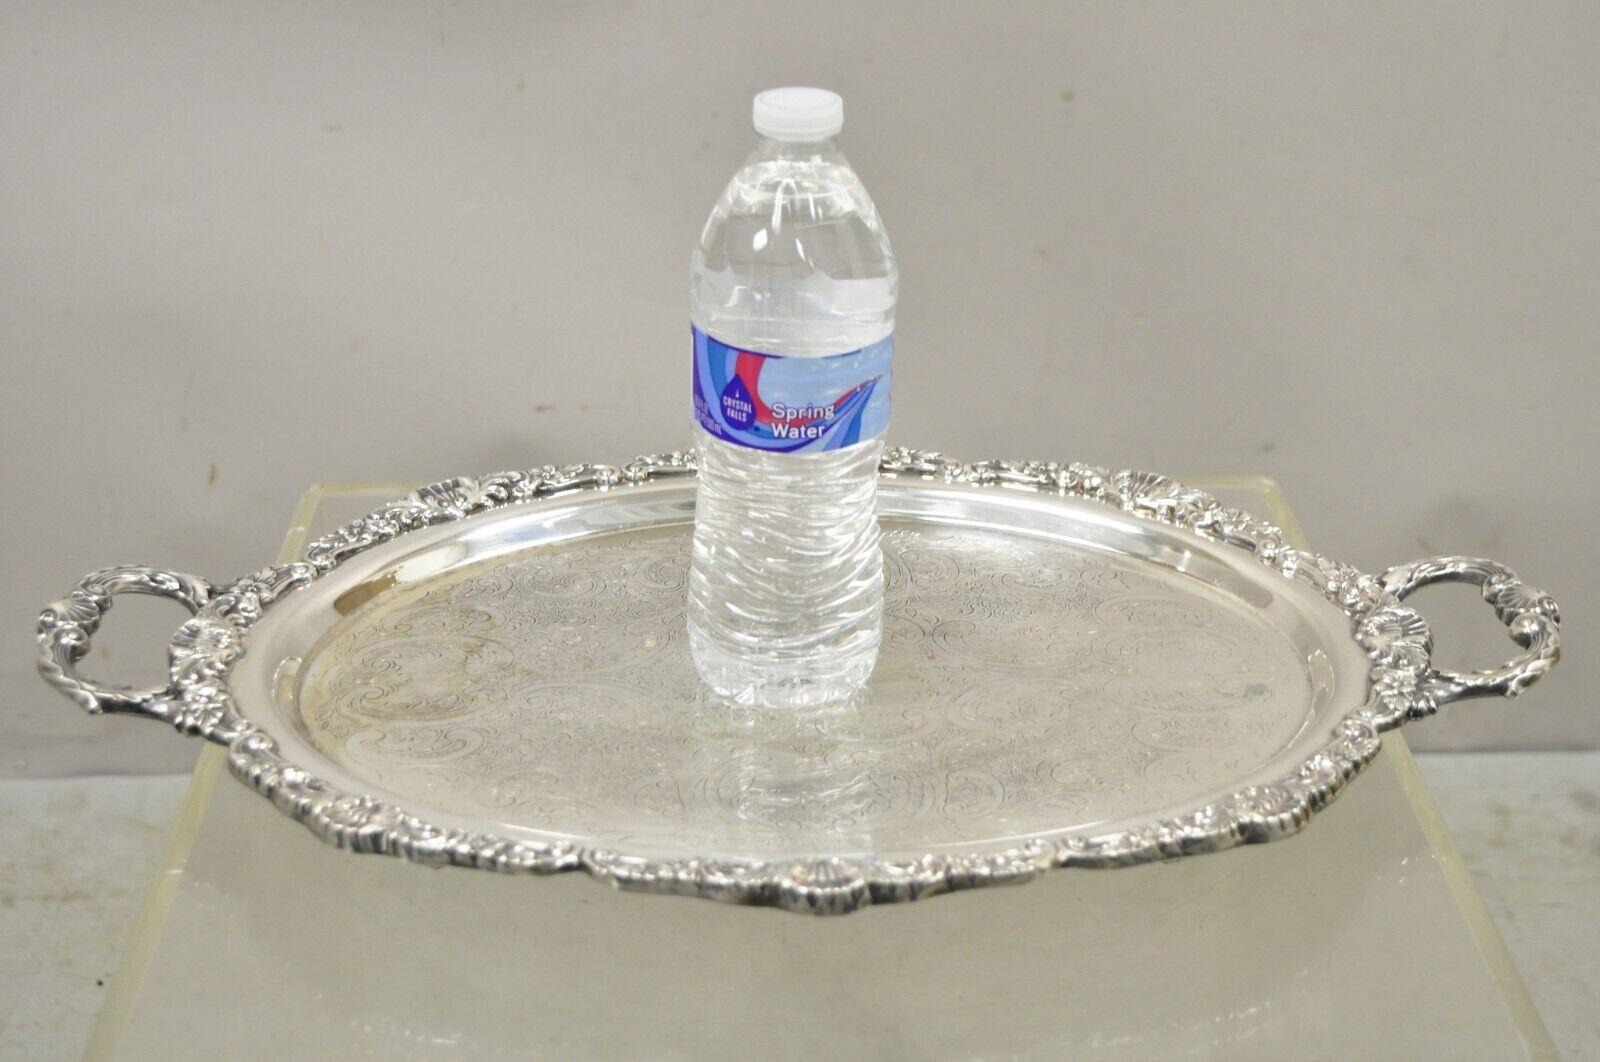 Vintage EPCA Bristol Silver by Poole 73 16 Silver Plated Oval Platter Tray. Item features the original hallmark, very nice vintage item, quality American craftsmanship, great style and form. Circa Early to Mid 20th Century. Measurements:  2